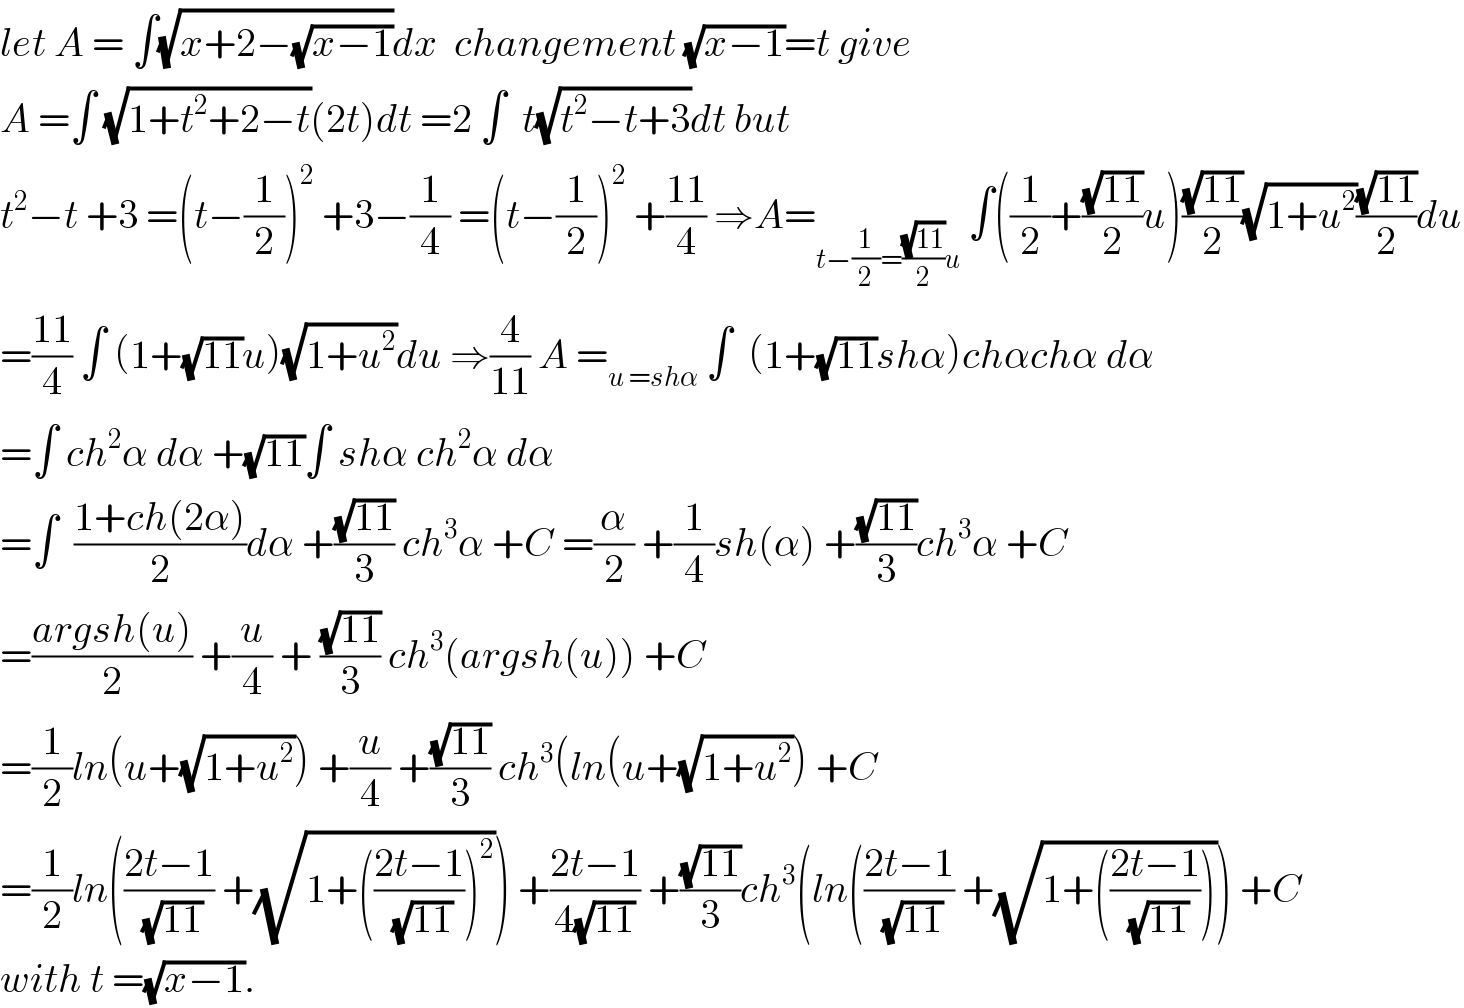 let A = ∫(√(x+2−(√(x−1))))dx  changement (√(x−1))=t give  A =∫ (√(1+t^2 +2−t))(2t)dt =2 ∫  t(√(t^2 −t+3))dt but   t^2 −t +3 =(t−(1/2))^2  +3−(1/4) =(t−(1/2))^2  +((11)/4) ⇒A=_(t−(1/2)=((√(11))/2)u)  ∫((1/2)+((√(11))/2)u)((√(11))/2)(√(1+u^2 ))((√(11))/2)du  =((11)/4) ∫ (1+(√(11))u)(√(1+u^2 ))du ⇒(4/(11)) A =_(u =shα)  ∫  (1+(√(11))shα)chαchα dα  =∫ ch^2 α dα +(√(11))∫ shα ch^2 α dα  =∫  ((1+ch(2α))/2)dα +((√(11))/3) ch^3 α +C =(α/2) +(1/4)sh(α) +((√(11))/3)ch^3 α +C  =((argsh(u))/2) +(u/4) + ((√(11))/3) ch^3 (argsh(u)) +C  =(1/2)ln(u+(√(1+u^2 ))) +(u/4) +((√(11))/3) ch^3 (ln(u+(√(1+u^2 ))) +C  =(1/2)ln(((2t−1)/(√(11))) +(√(1+(((2t−1)/(√(11))))^2 ))) +((2t−1)/(4(√(11)))) +((√(11))/3)ch^3 (ln(((2t−1)/(√(11))) +(√(1+(((2t−1)/(√(11))))))) +C  with t =(√(x−1)).  